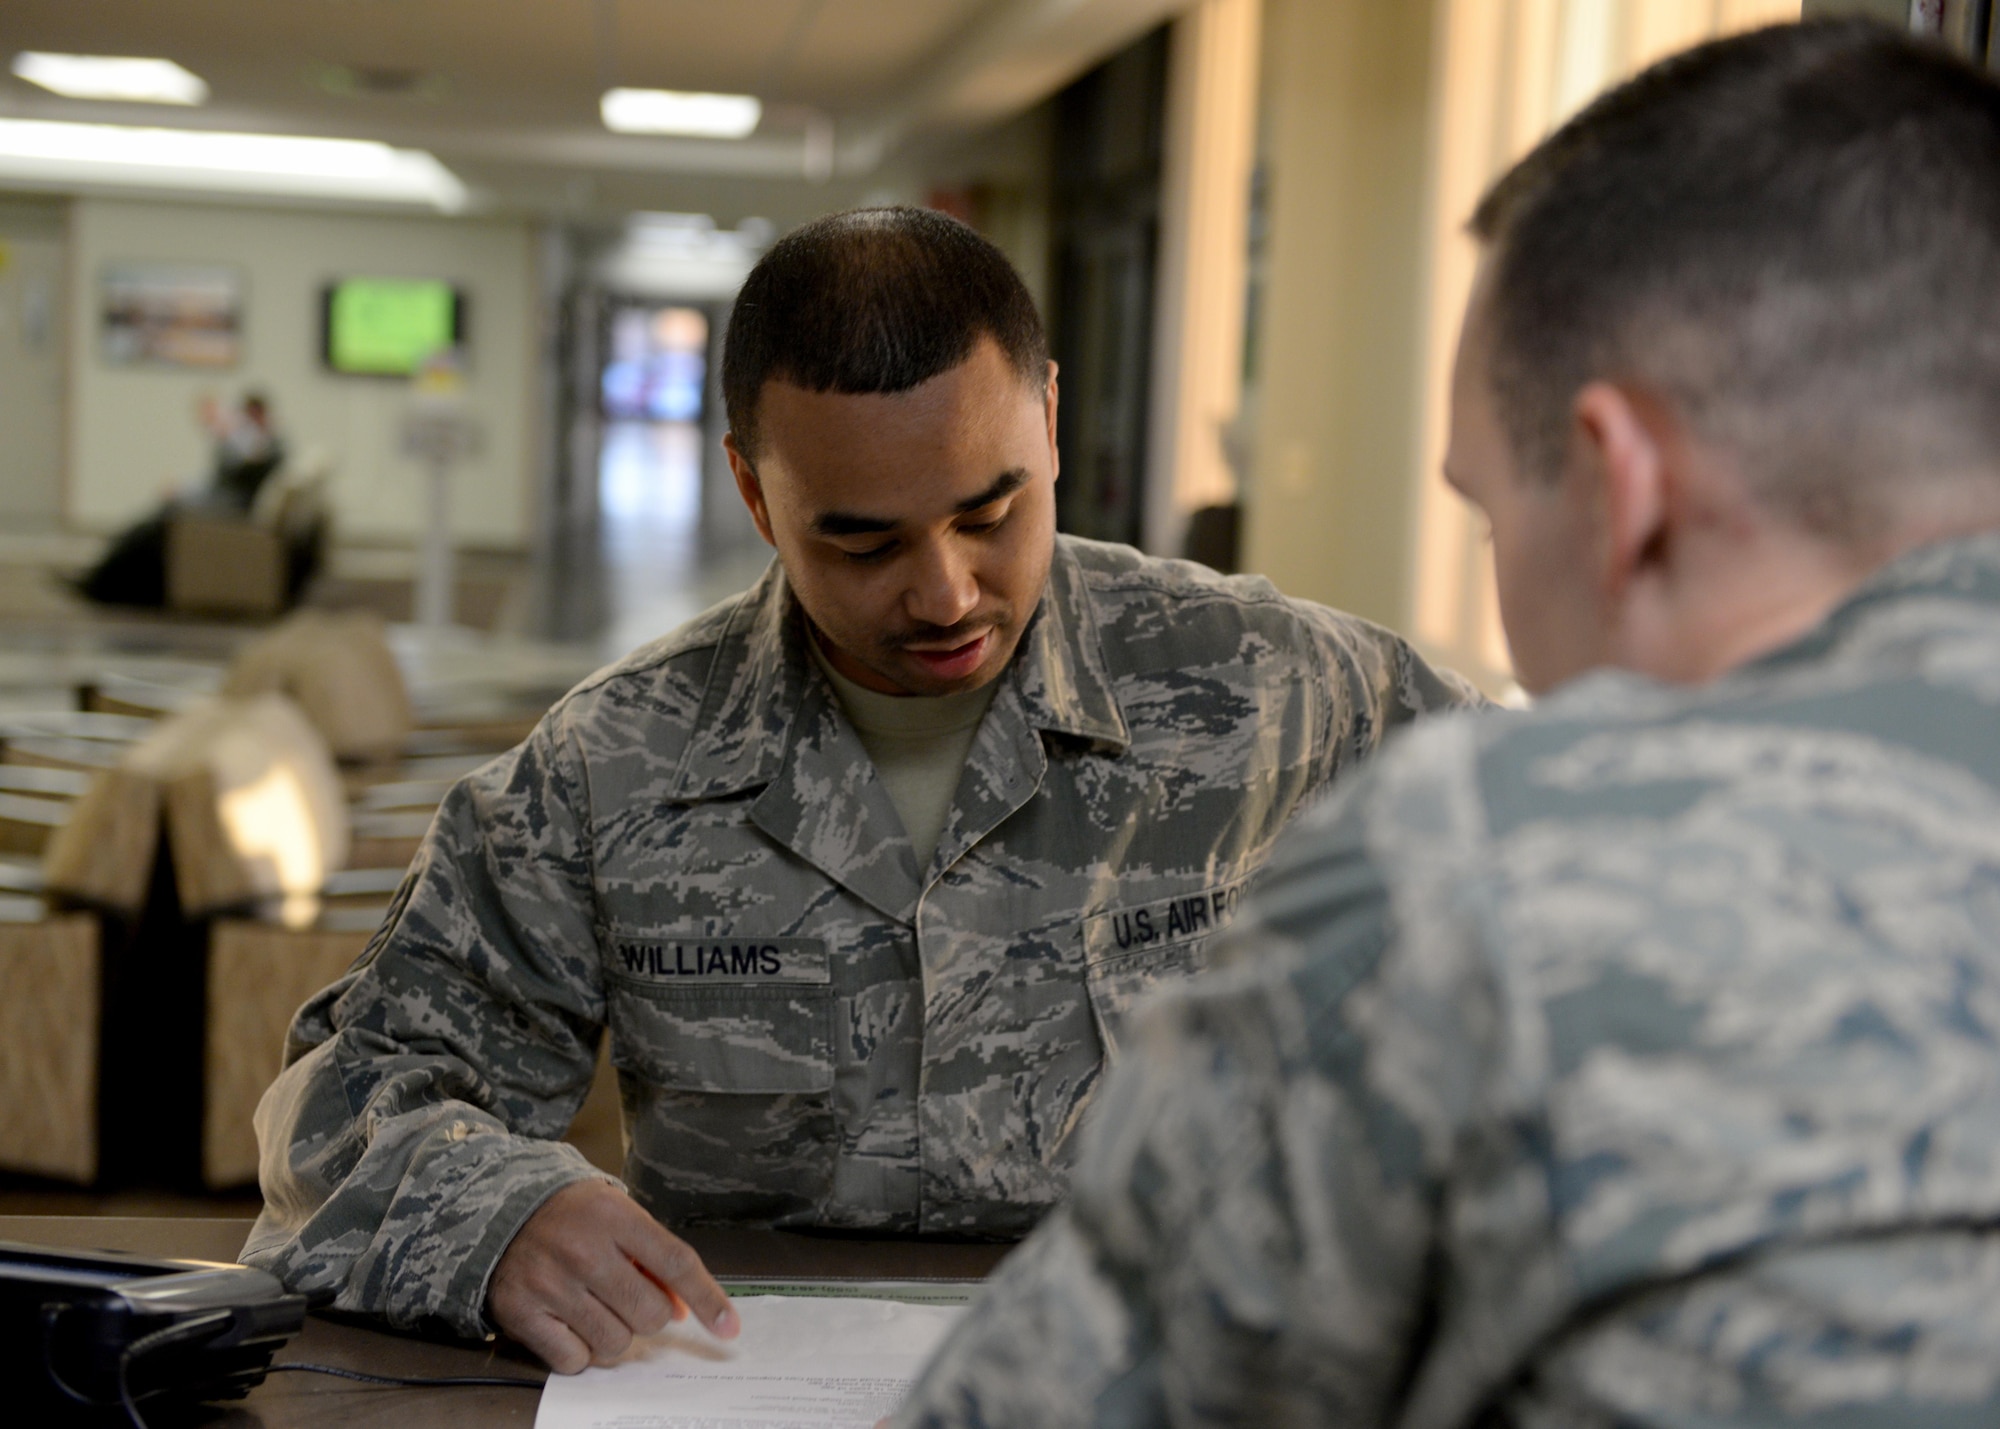 U.S. Air Force Tech Sgt. Eric Williams, 97th Medical Support Squadron NCO in charge of the base pharmacy, fills out a sheet to get a cold medication packs, April 10, 2017, at Altus Air Force Base, Oklahoma. The base pharmacy offers cold medication packs to those who meet their qualifications to help cut down on patient and health care provider’s time and money. (U.S. Air Force Photo by Airman 1st Class Jackson N. Haddon/Released).